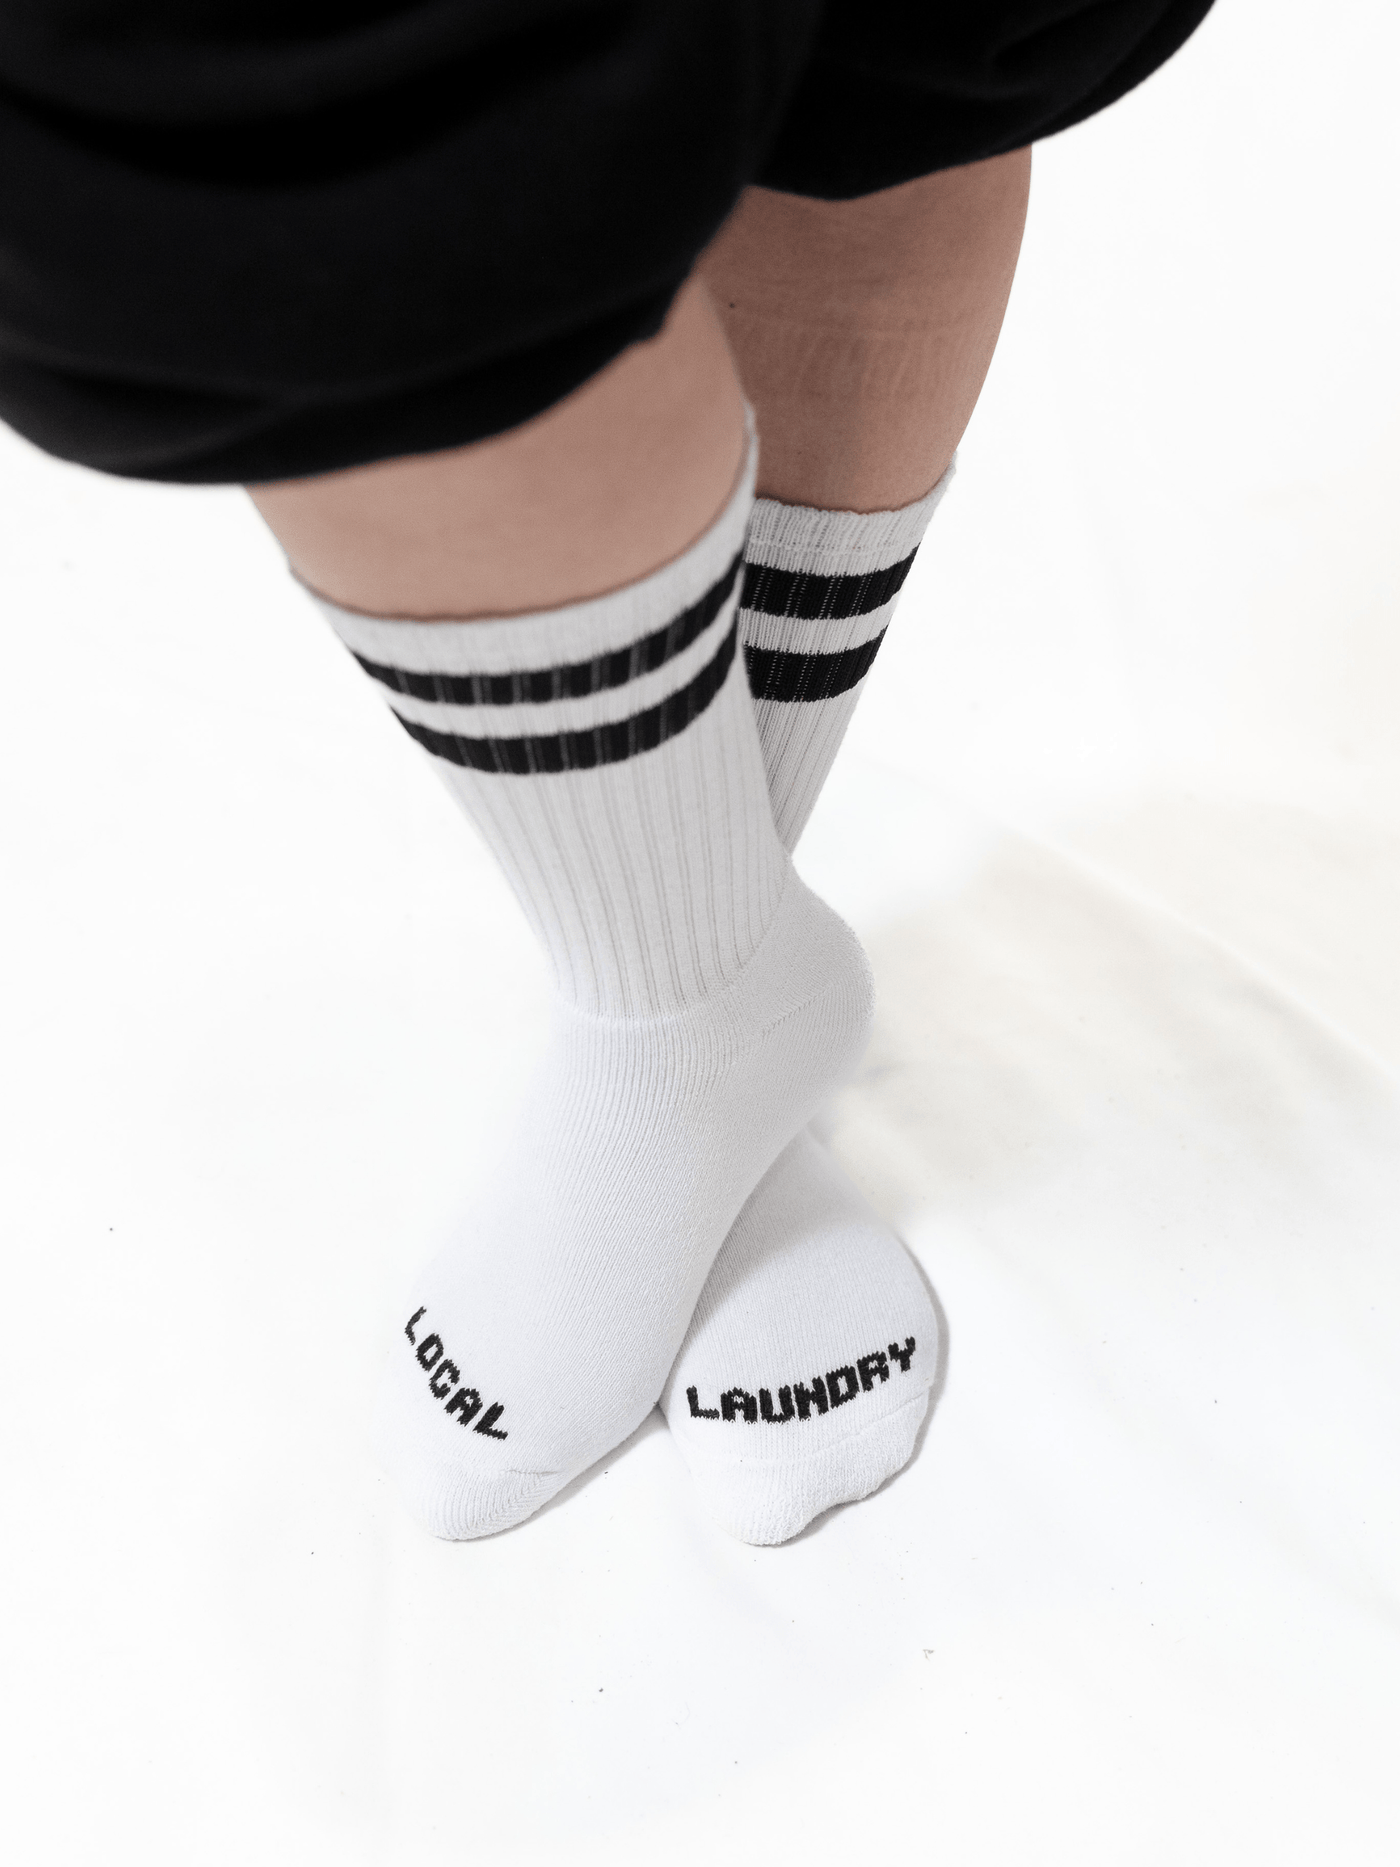 The Local Laundry Giving Sock, white with black contrast stripes and the phrase "Local" and "Laundry" across each foot. These socks are made in Canada and all proceeds go towards giving socks to charities.